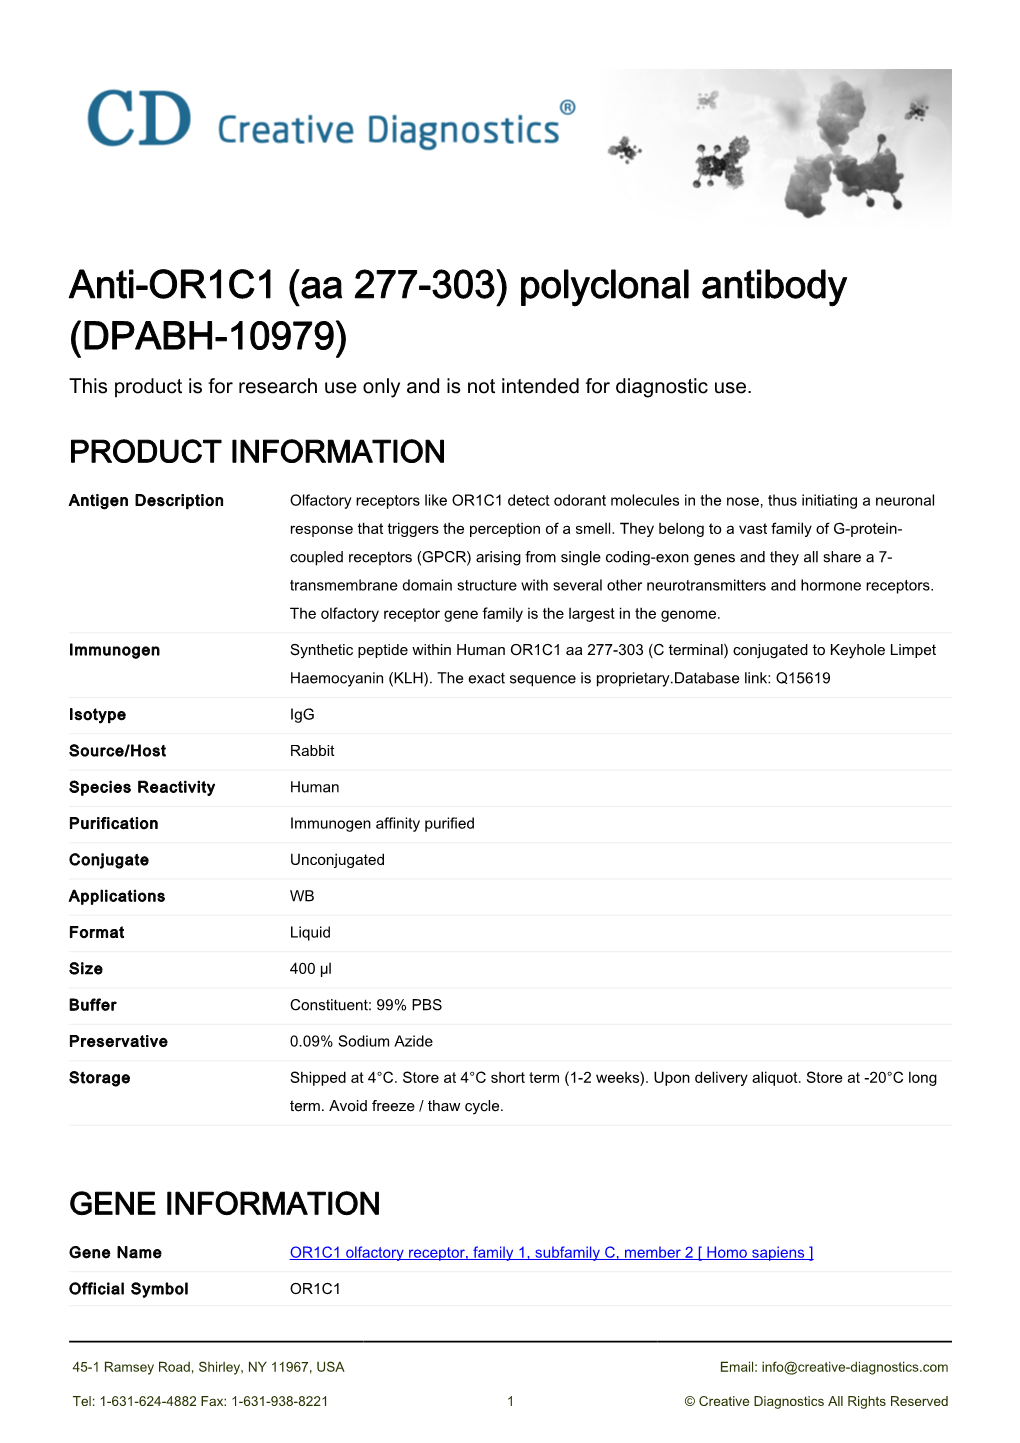 Anti-OR1C1 (Aa 277-303) Polyclonal Antibody (DPABH-10979) This Product Is for Research Use Only and Is Not Intended for Diagnostic Use